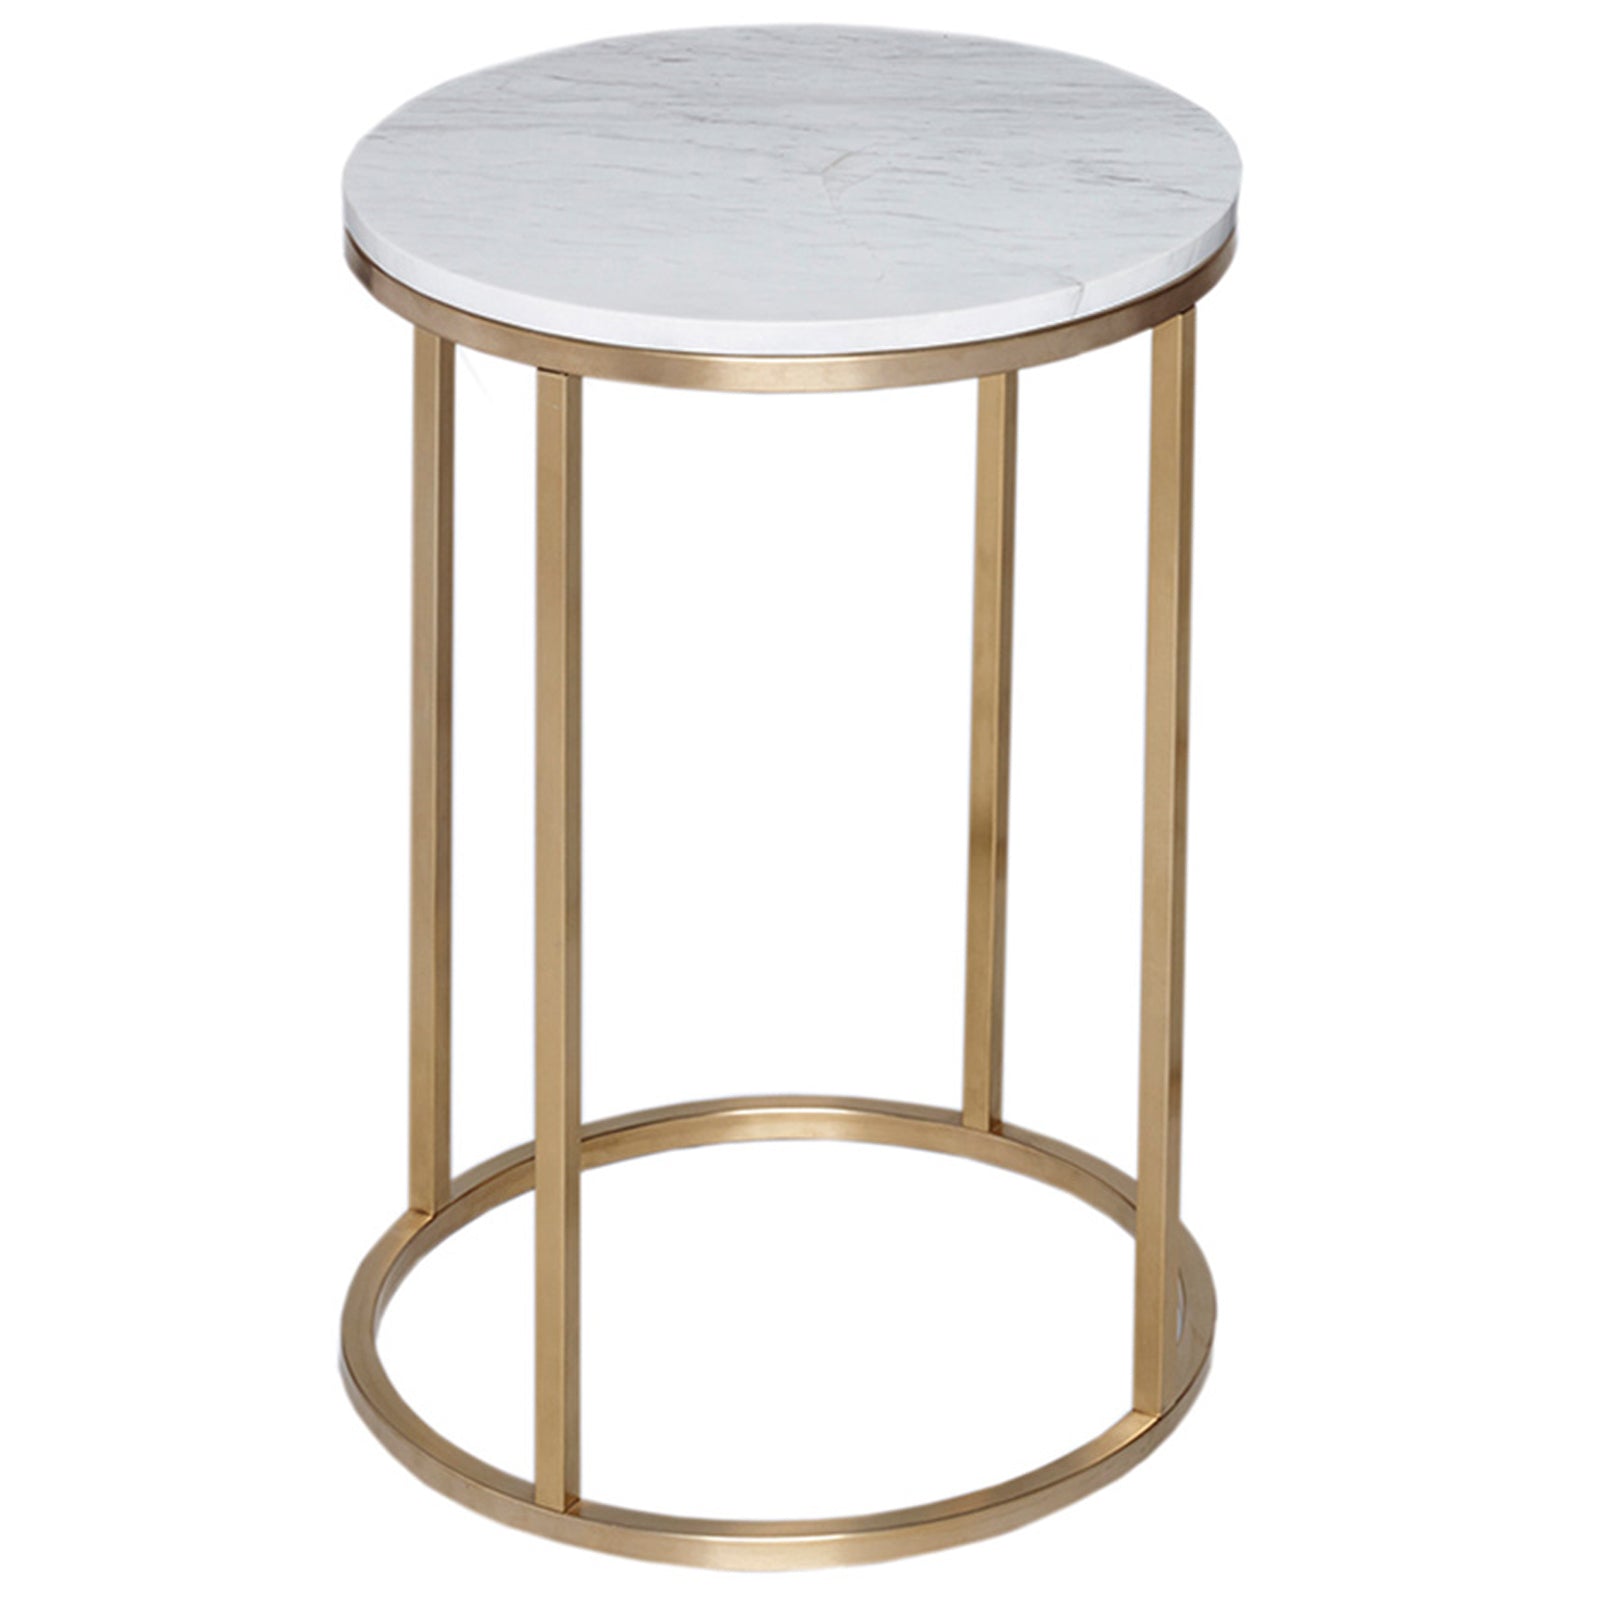 Kentish Round Side Table Highgate Home Luxdecocom